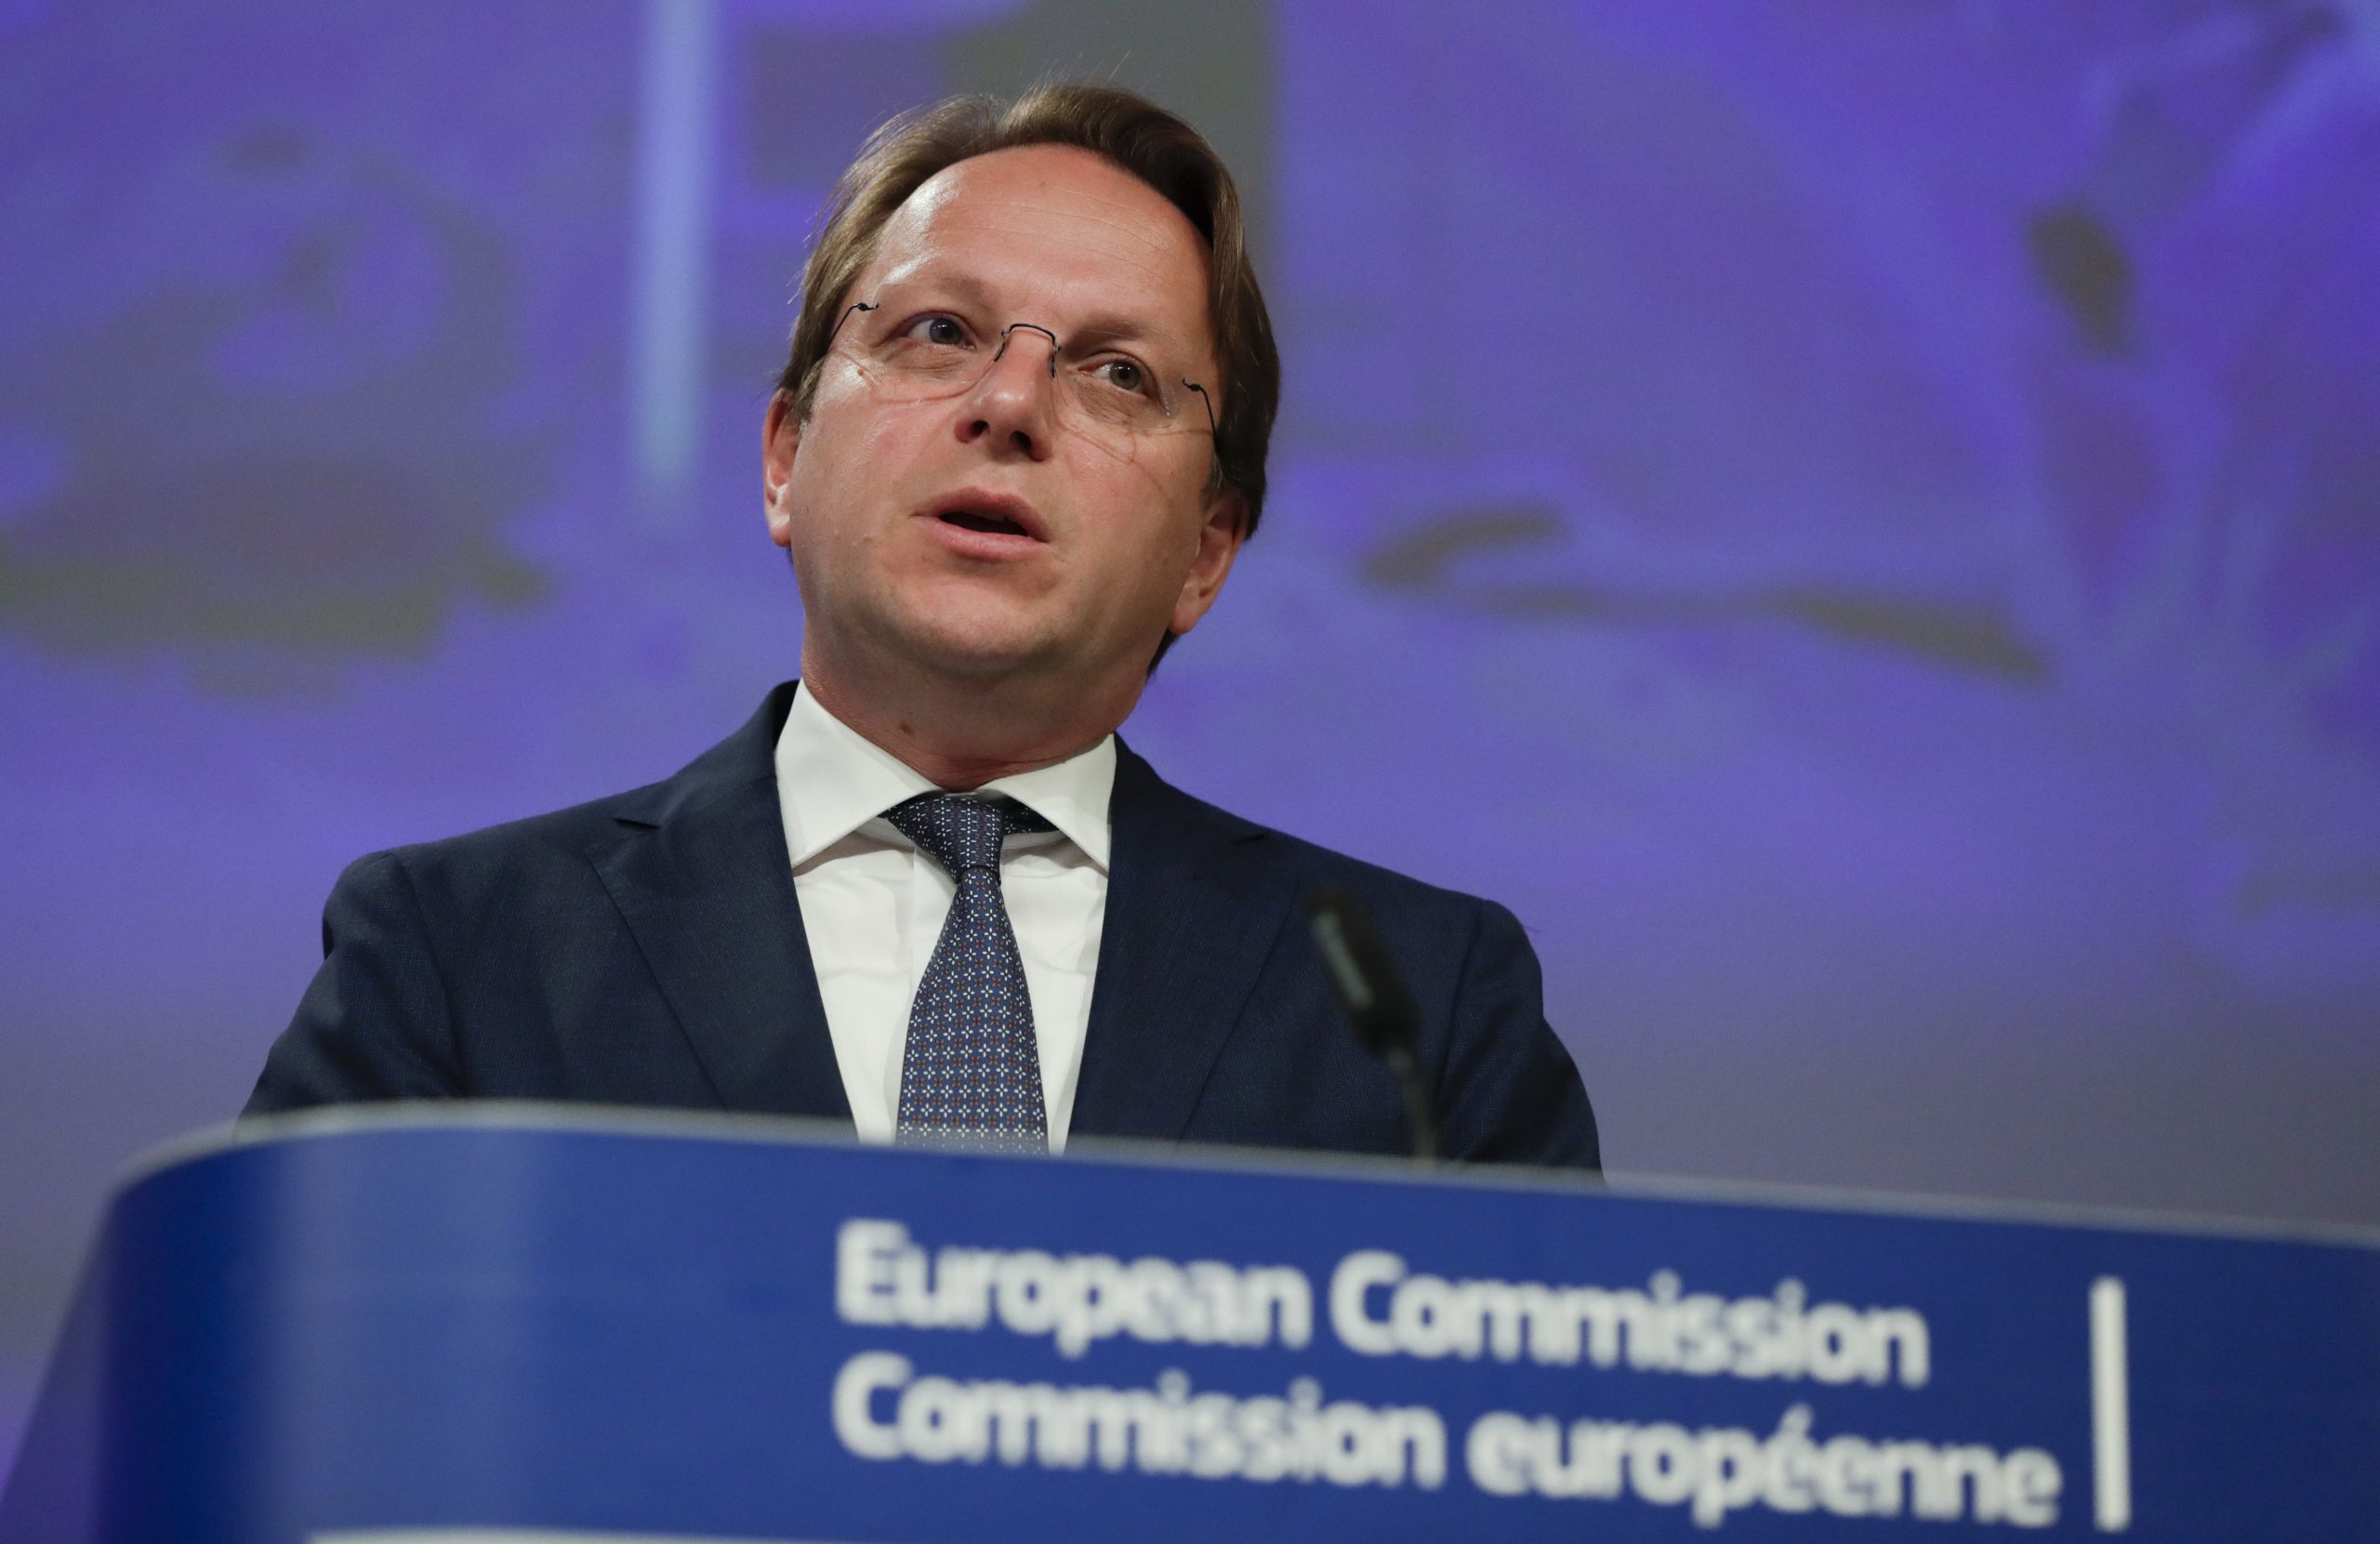 Commissioner: EU, Mediterranean Countries Must Cooperate to Stop Illegal Migration